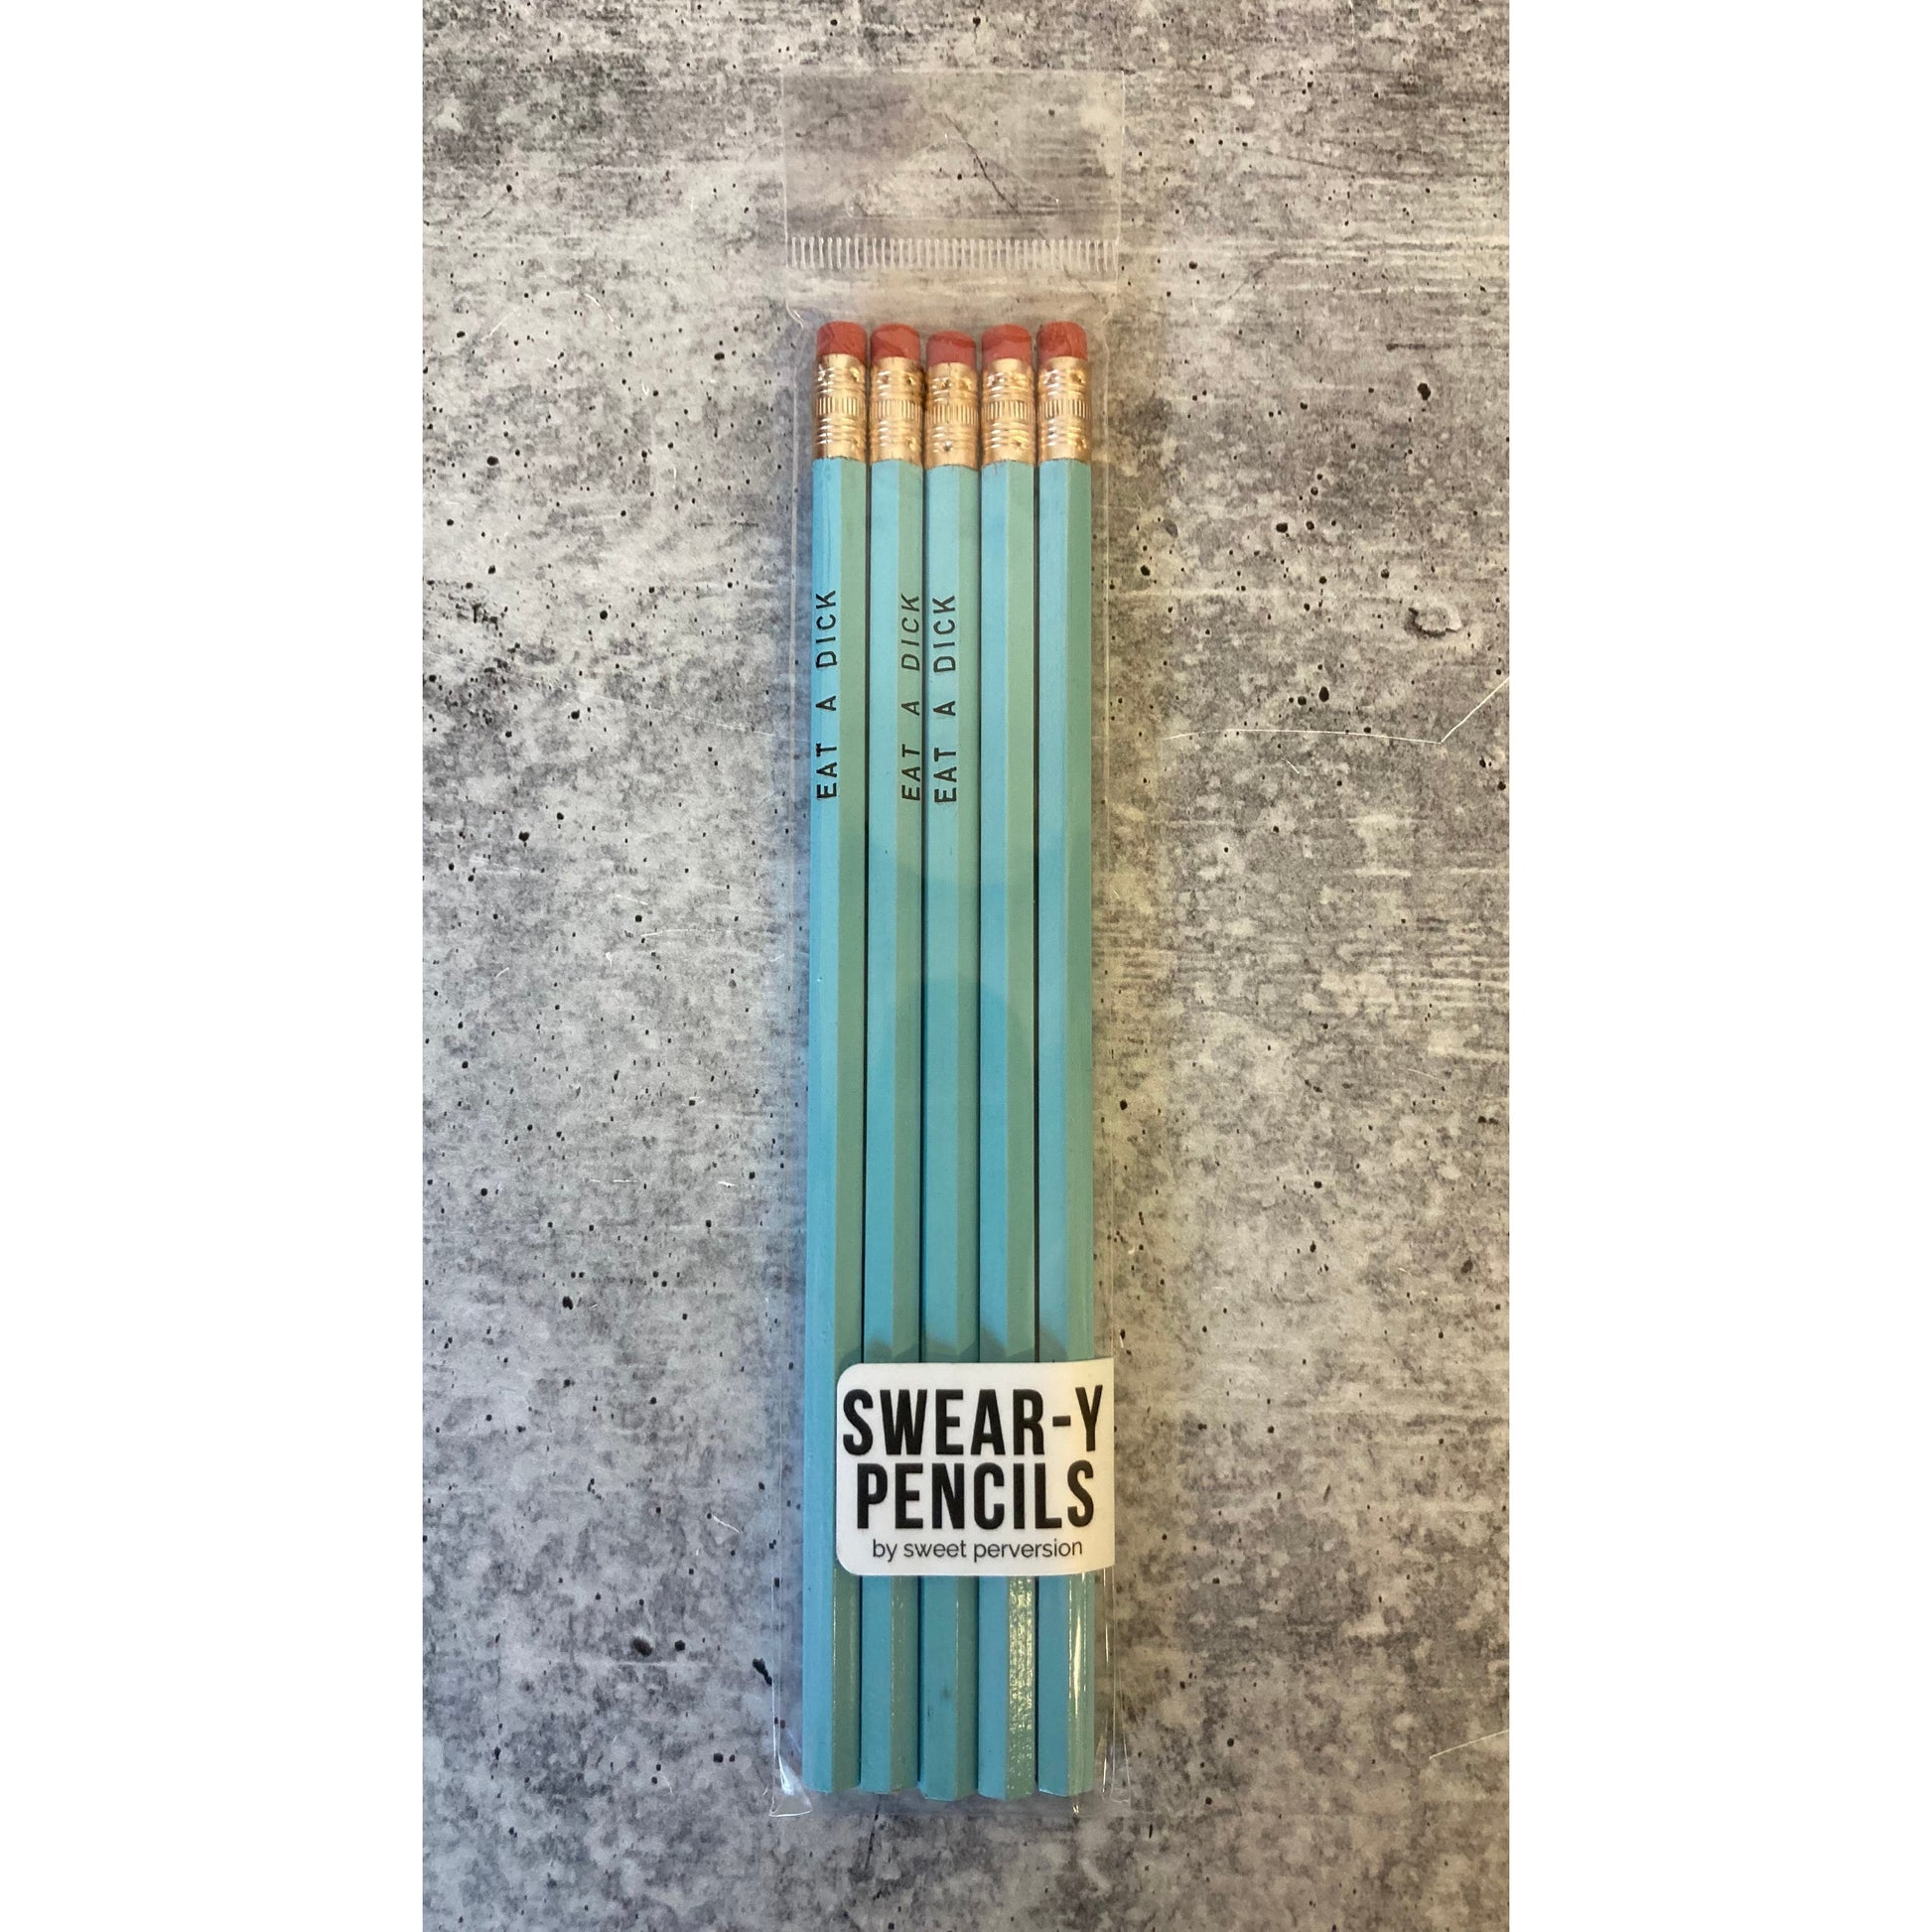 Eat A Dick Pencil Set in Blue | Set of 5 Funny Sweary Profanity Pencils